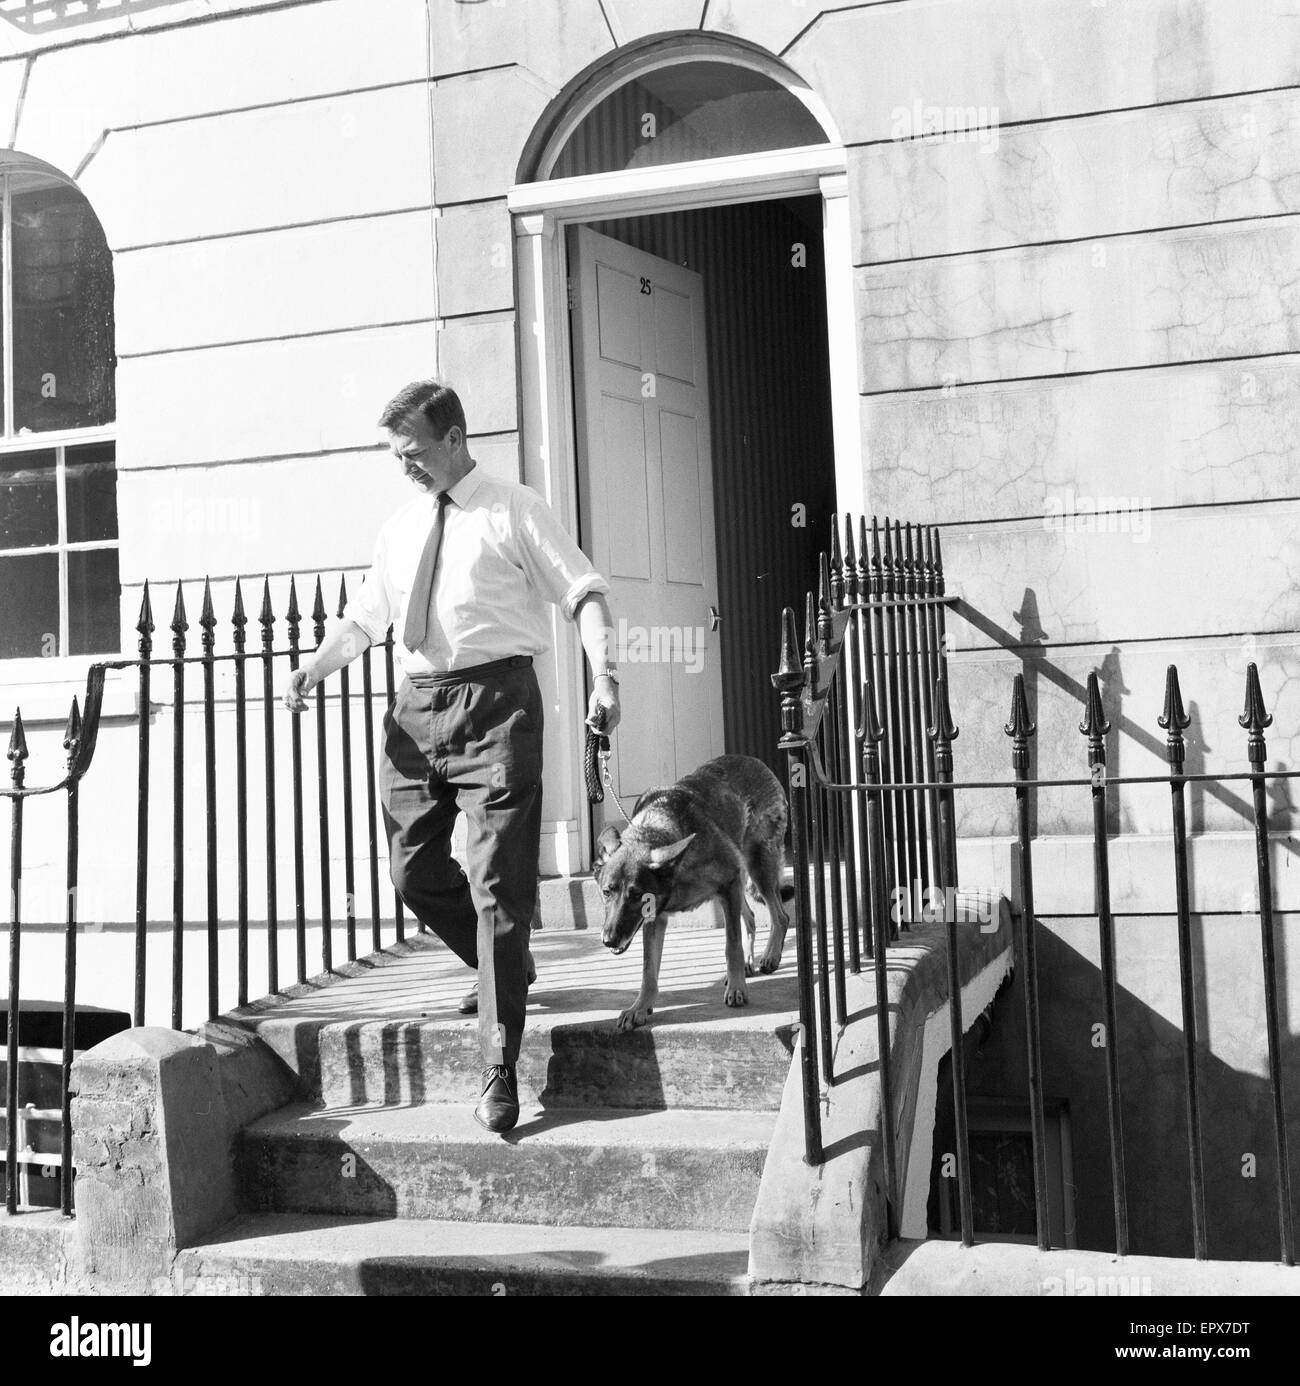 Crime Scene, 25 Noel Road, Islington, North London, where the bodies of two men, Joe Orton and Kenneth Halliwell were discovered in the tope floor flat today, Wednesday 9th August 1967.  Kenneth Halliwell bludgeoned 34-year-old Orton to death at his home Stock Photo